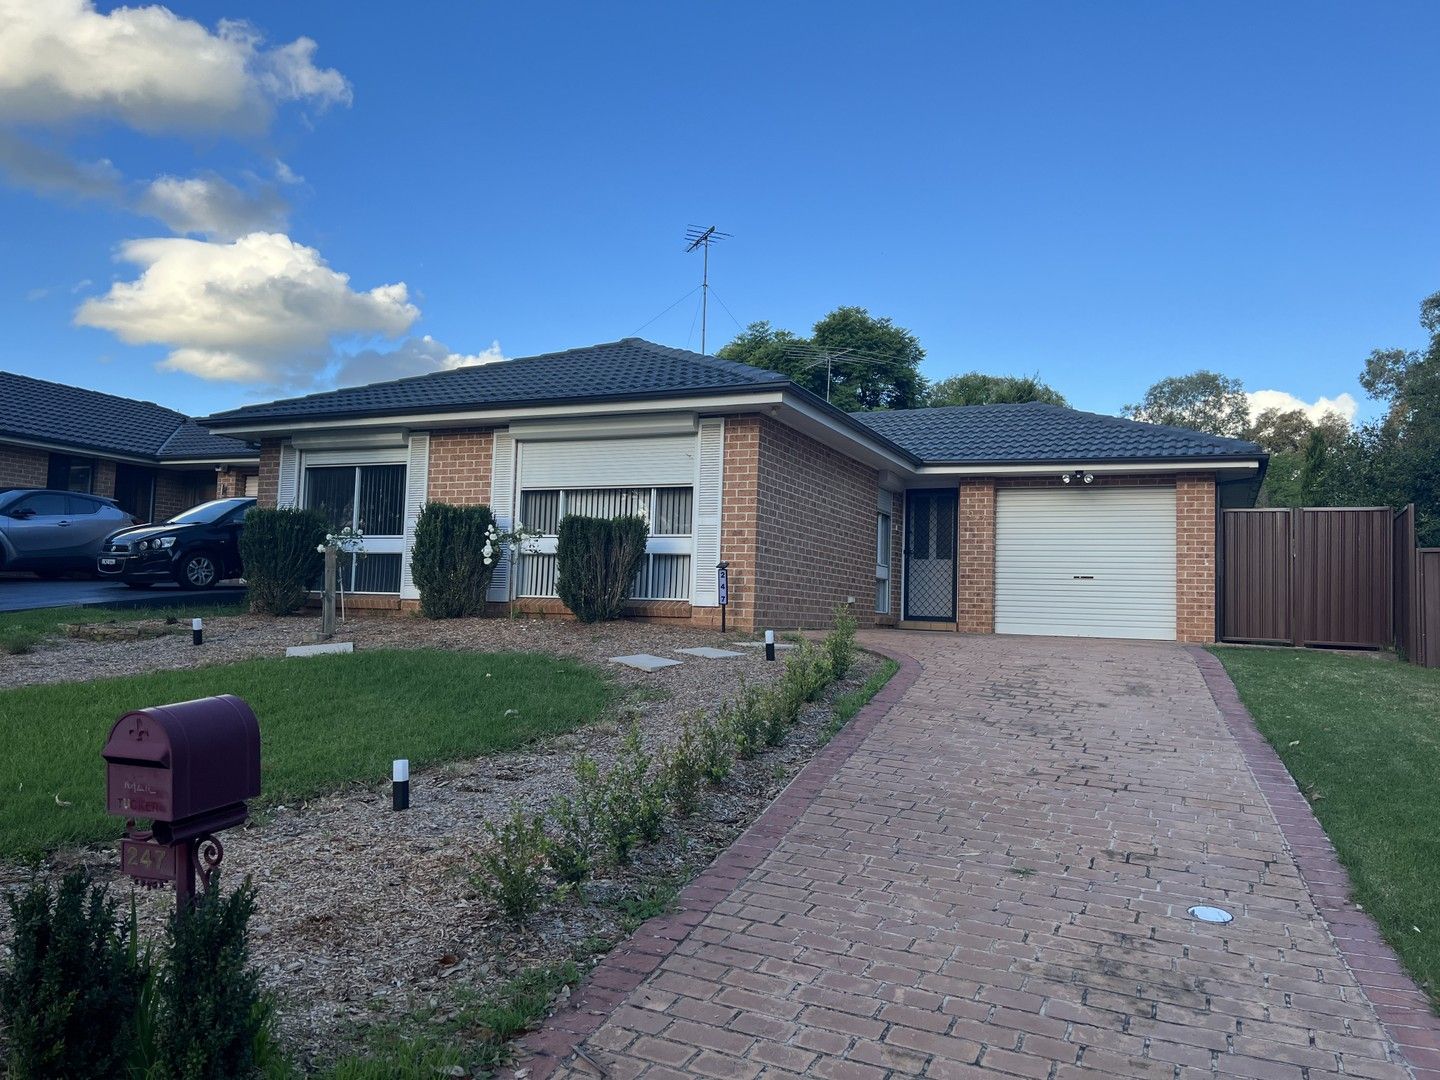 3 bedrooms House in 247 Welling Drive MOUNT ANNAN NSW, 2567